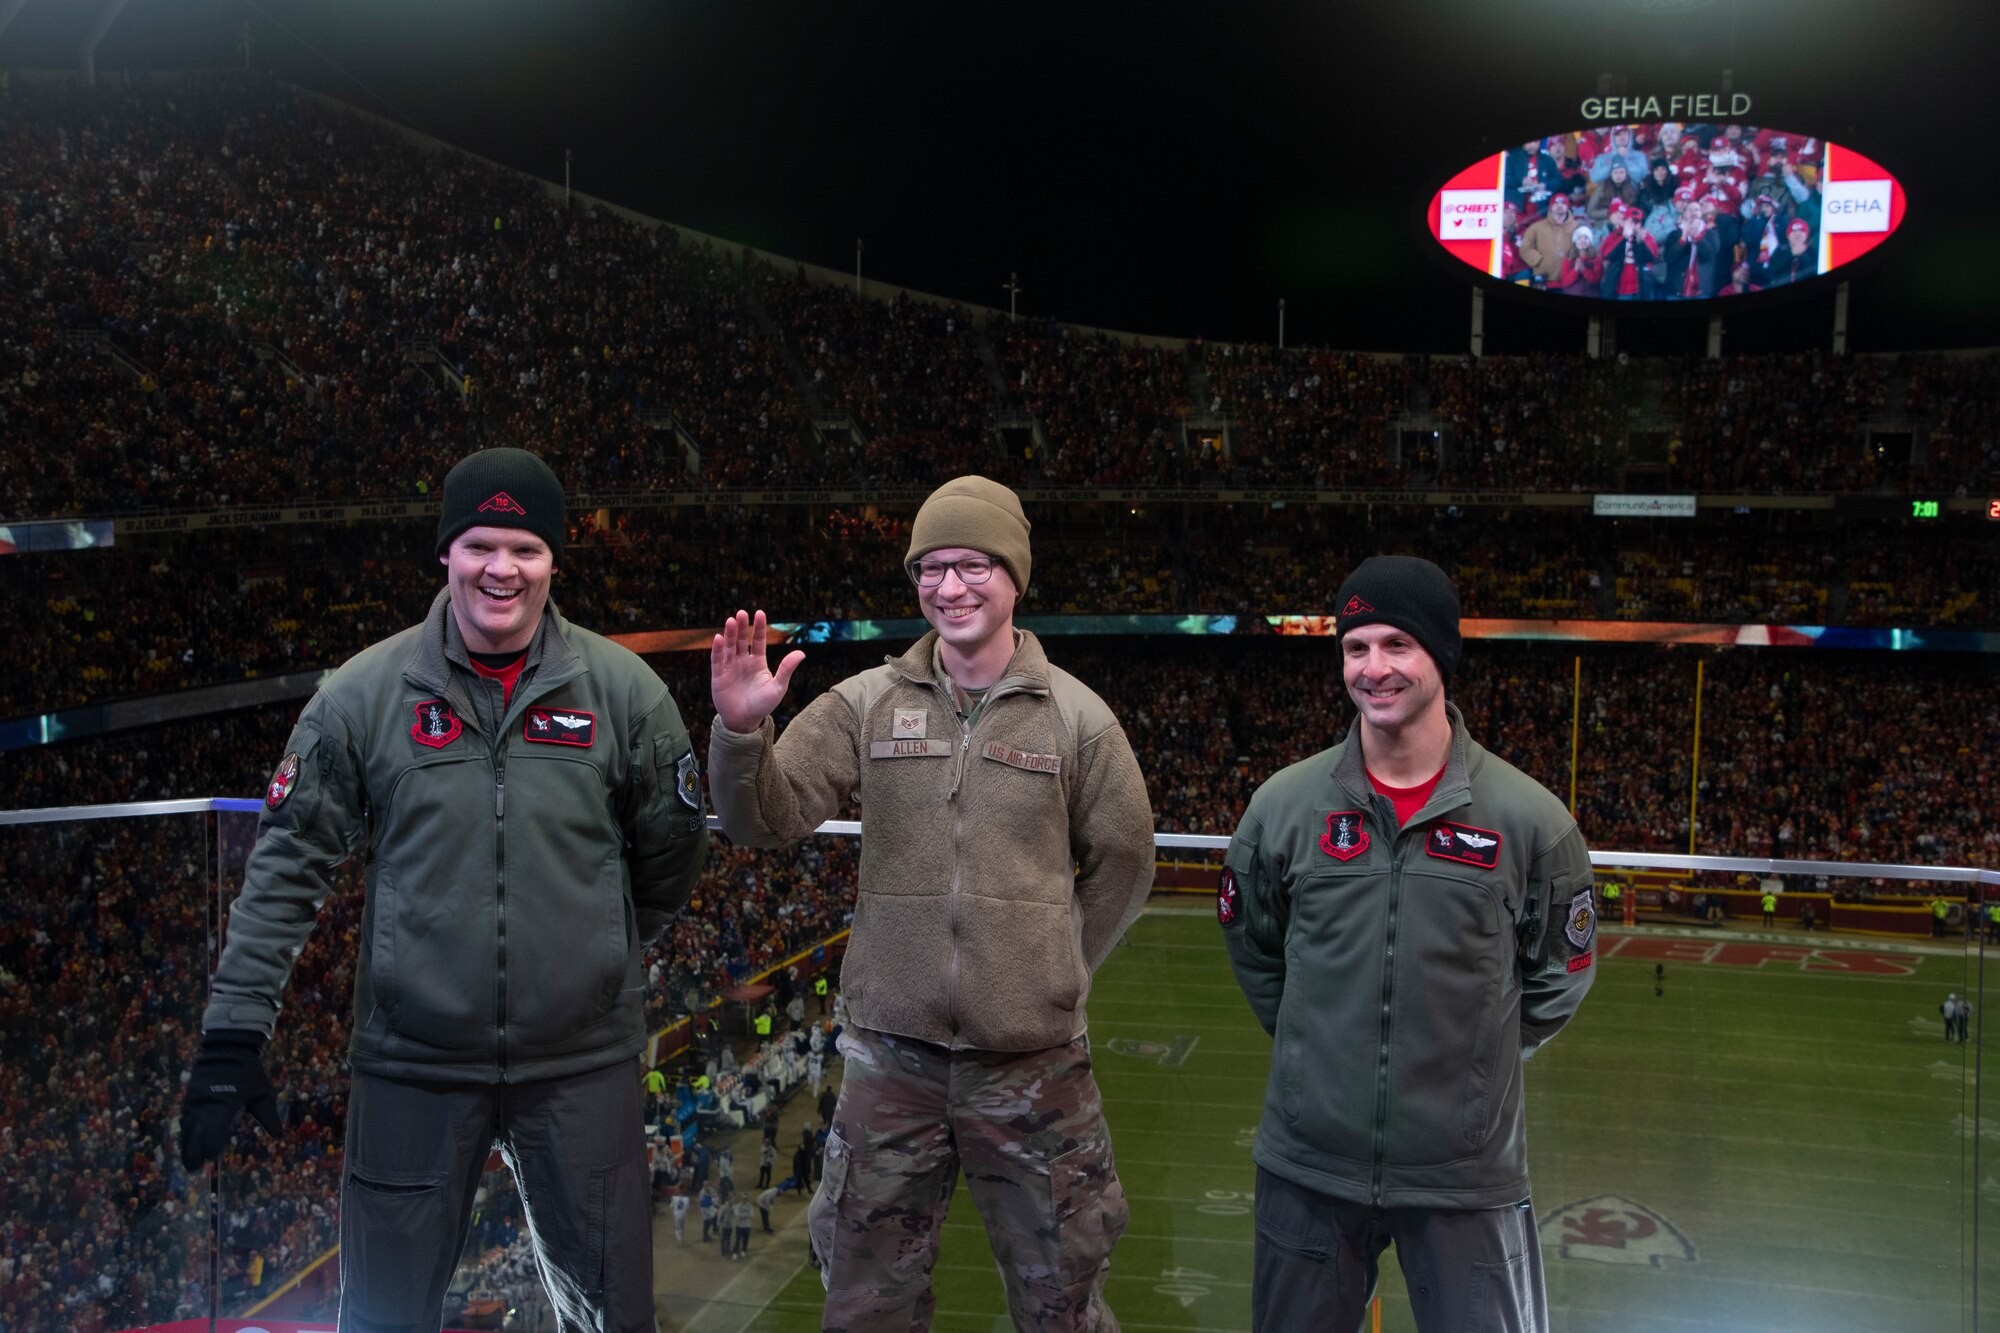 Members of the ground crew, from left to right, Lt. Col. Ponzi Meyer, Staff Sgt. Anthony Allen and Maj. Spider Falcone wave to the crowd following a B-2 Spirit flyover during the AFC Divisional Playoff game at Arrowhead Stadium, Kansas City, Missouri, Jan. 23, 2022. Meyer and Falcone are B-2 Spirit pilots with the 131st Bomb Wing, Missouri National Guard, and Allen is a B-2 crew chief with the 509th Aircraft Maintenance Squadron, Whteiman Air Force Base. B-2 crews perform flyovers as part of regularly scheduled training flights and to support community functions and government events. (U.S. Air National Guard photo by Airman 1st Class Kelly C. Ferguson)